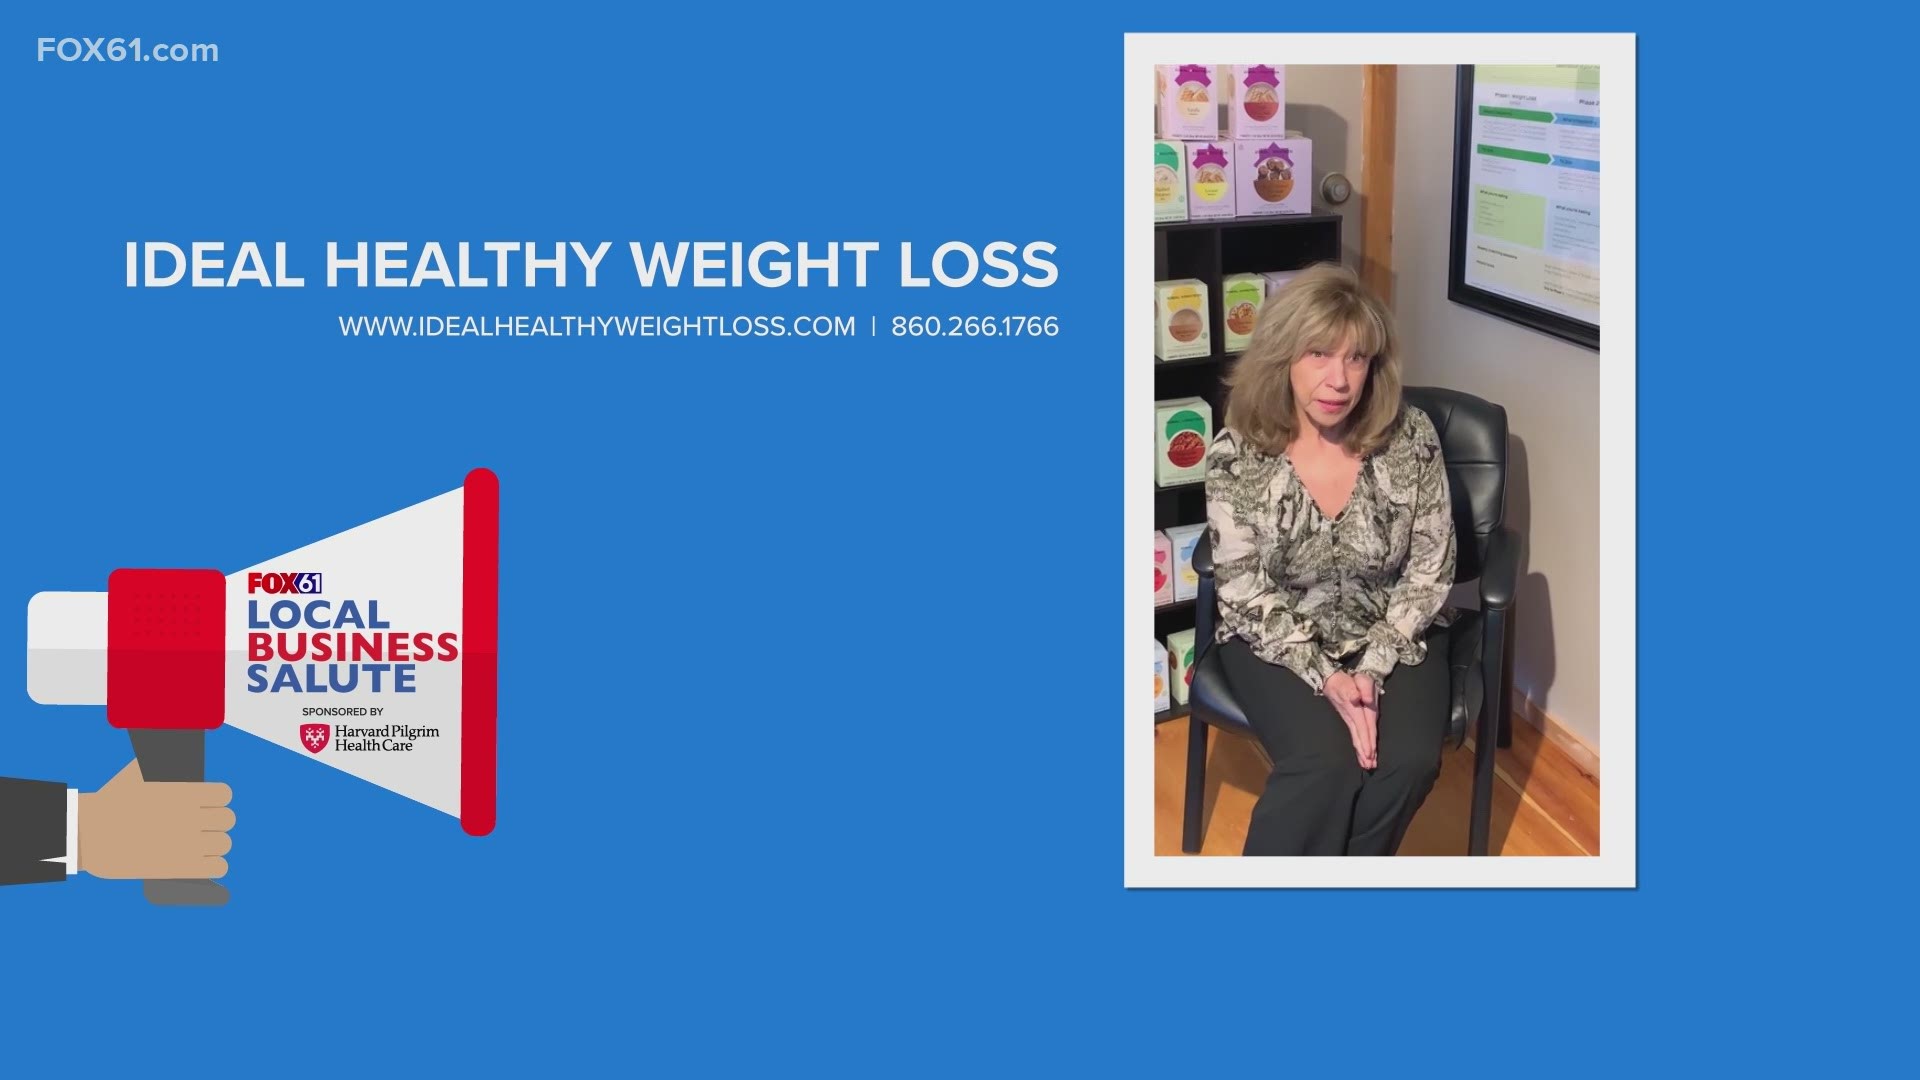 Ideal Healthy Weight Loss has clinics where they say their medically developed weight loss protocol can put an end to constant dieting